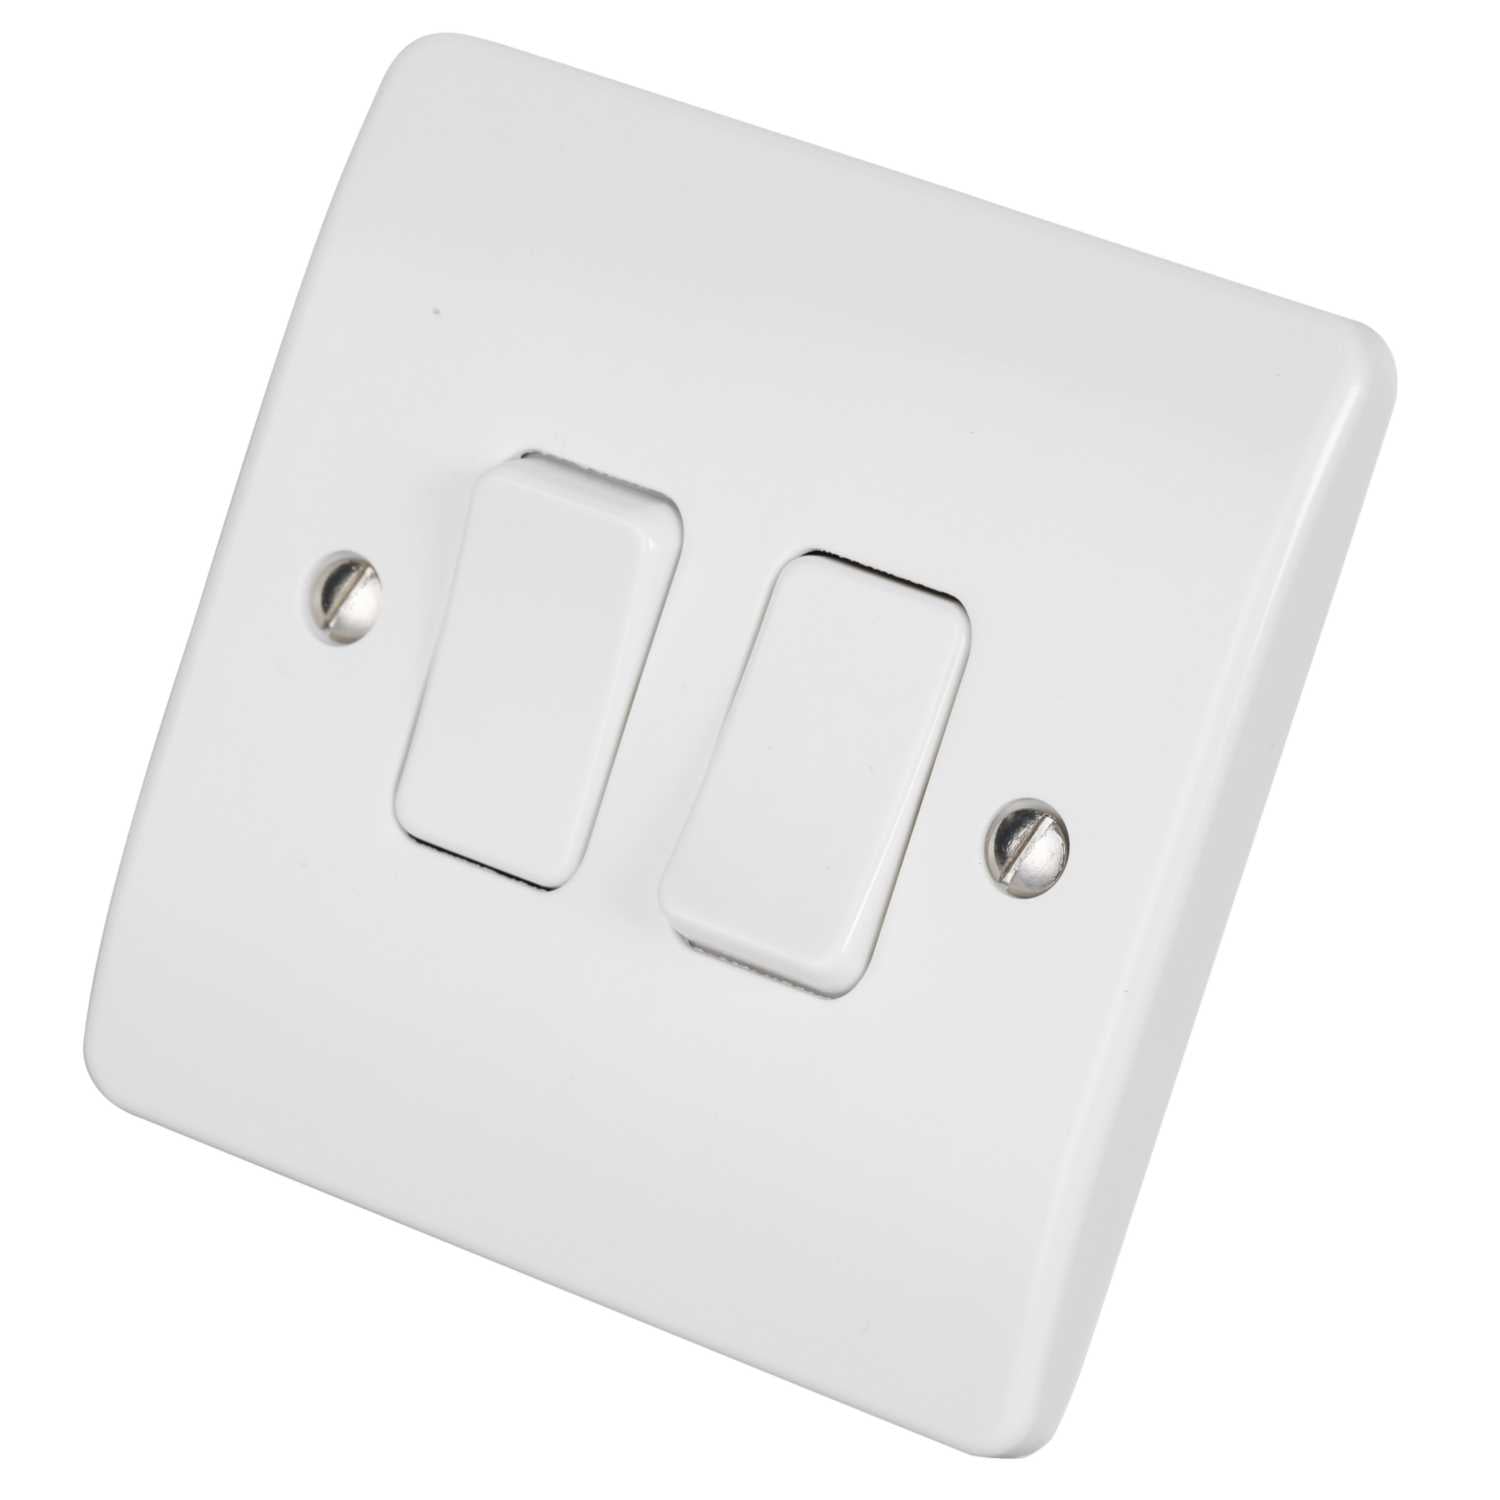 MK Electric 10A 2-Gang 2-Way Light Switch | Supply Master | Accra, Ghana Switches & Sockets Buy Tools hardware Building materials